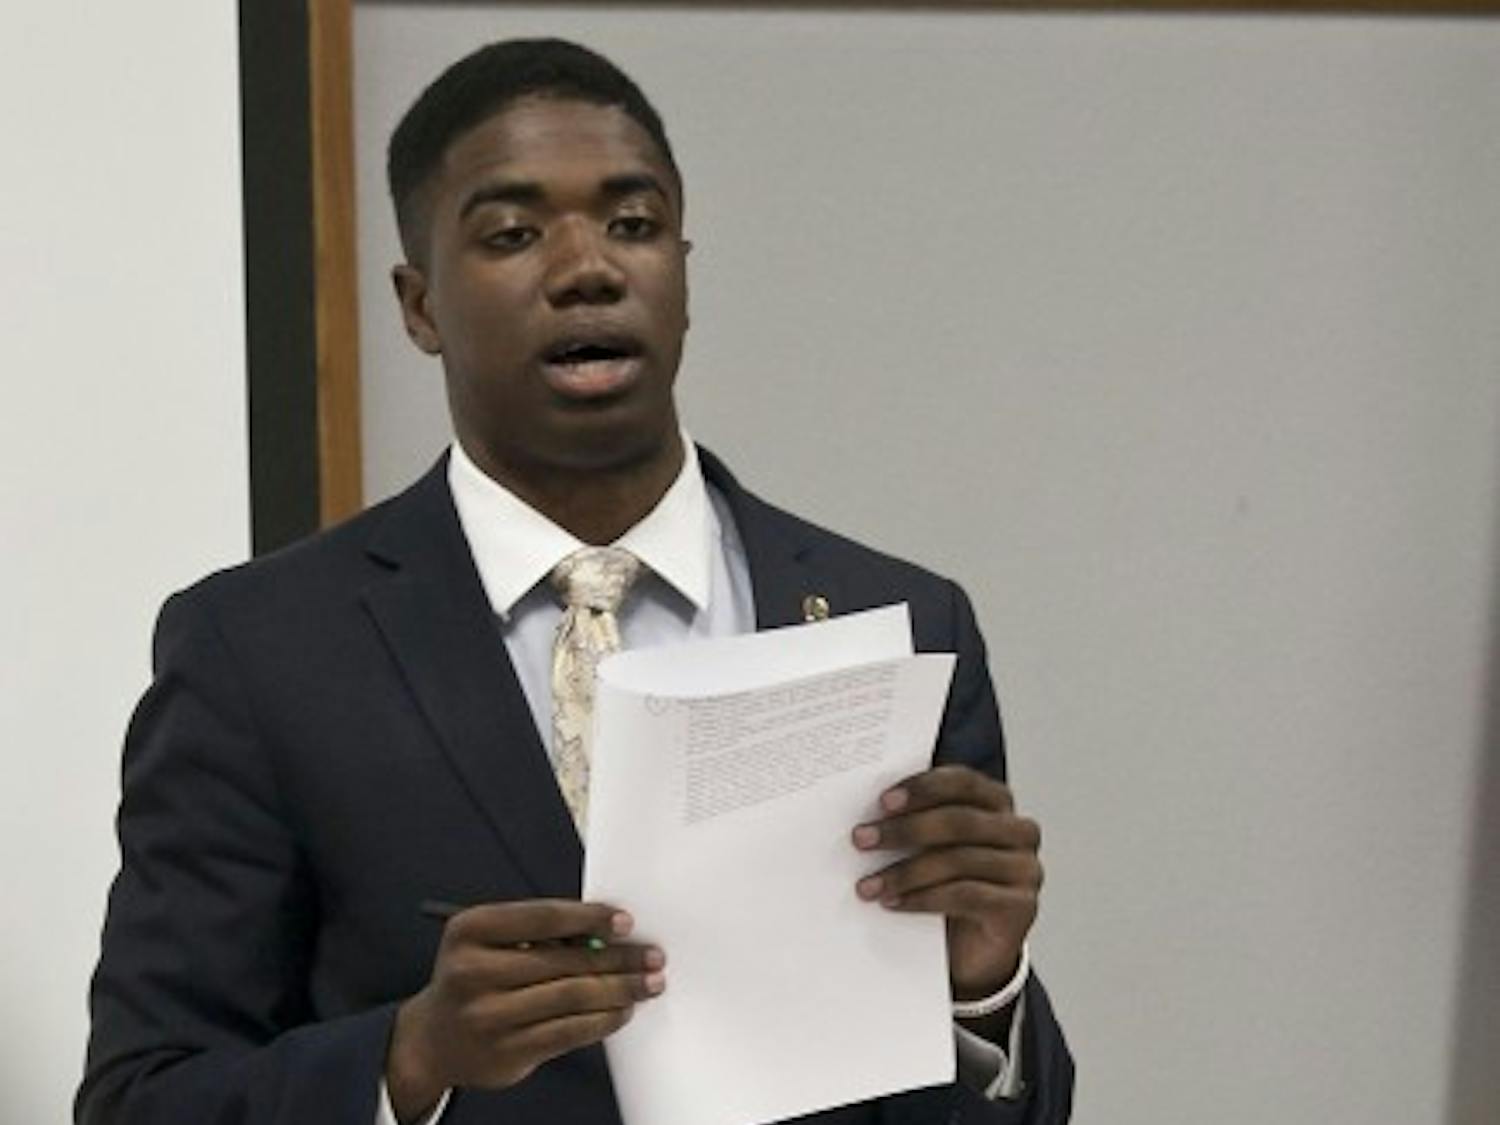 STUDENT SENATE -- Senate President Aundre Price provides copies of Rule XIII Censure, Expulsion and Officer Removal Tuesday at UF's Senate meeting after receiving complaints about senator behavior during the meeting May 29. He told senators to follow the procedures described in the rules if he or she wishes for another senator to be censored or removed.